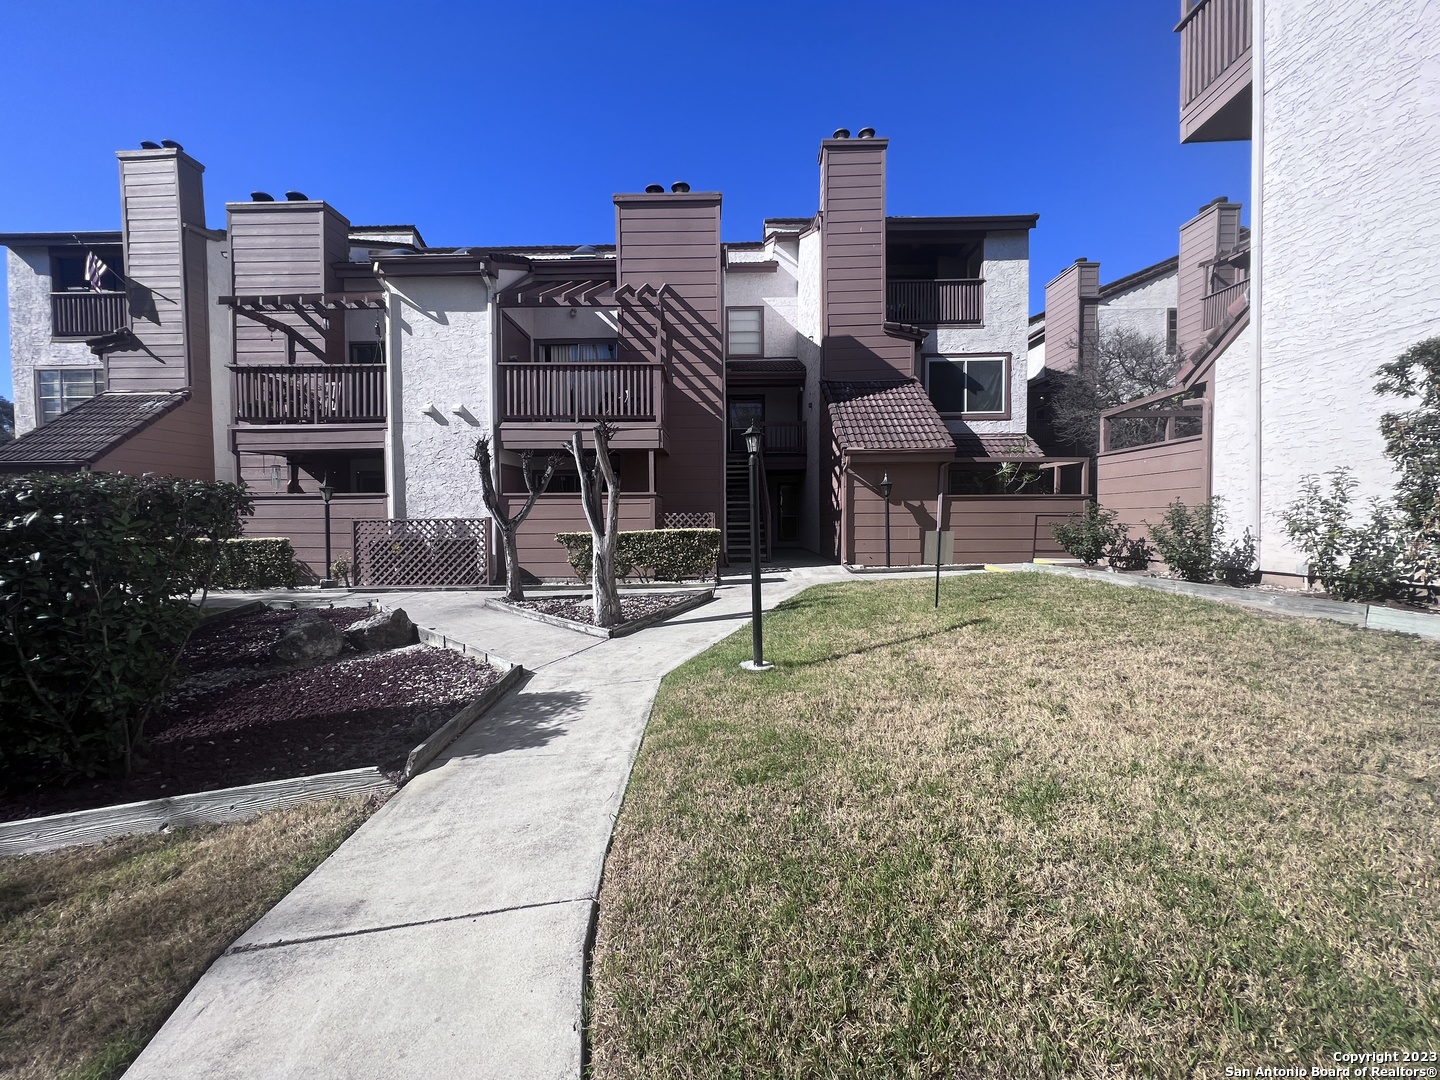 2 bdrm condo ideally located just inside I-10 on Medical Dr. Condo has great view of picnic area and is located near the back of the property, close to the pool. Unit is on second level of bldg and unit itself has two stories